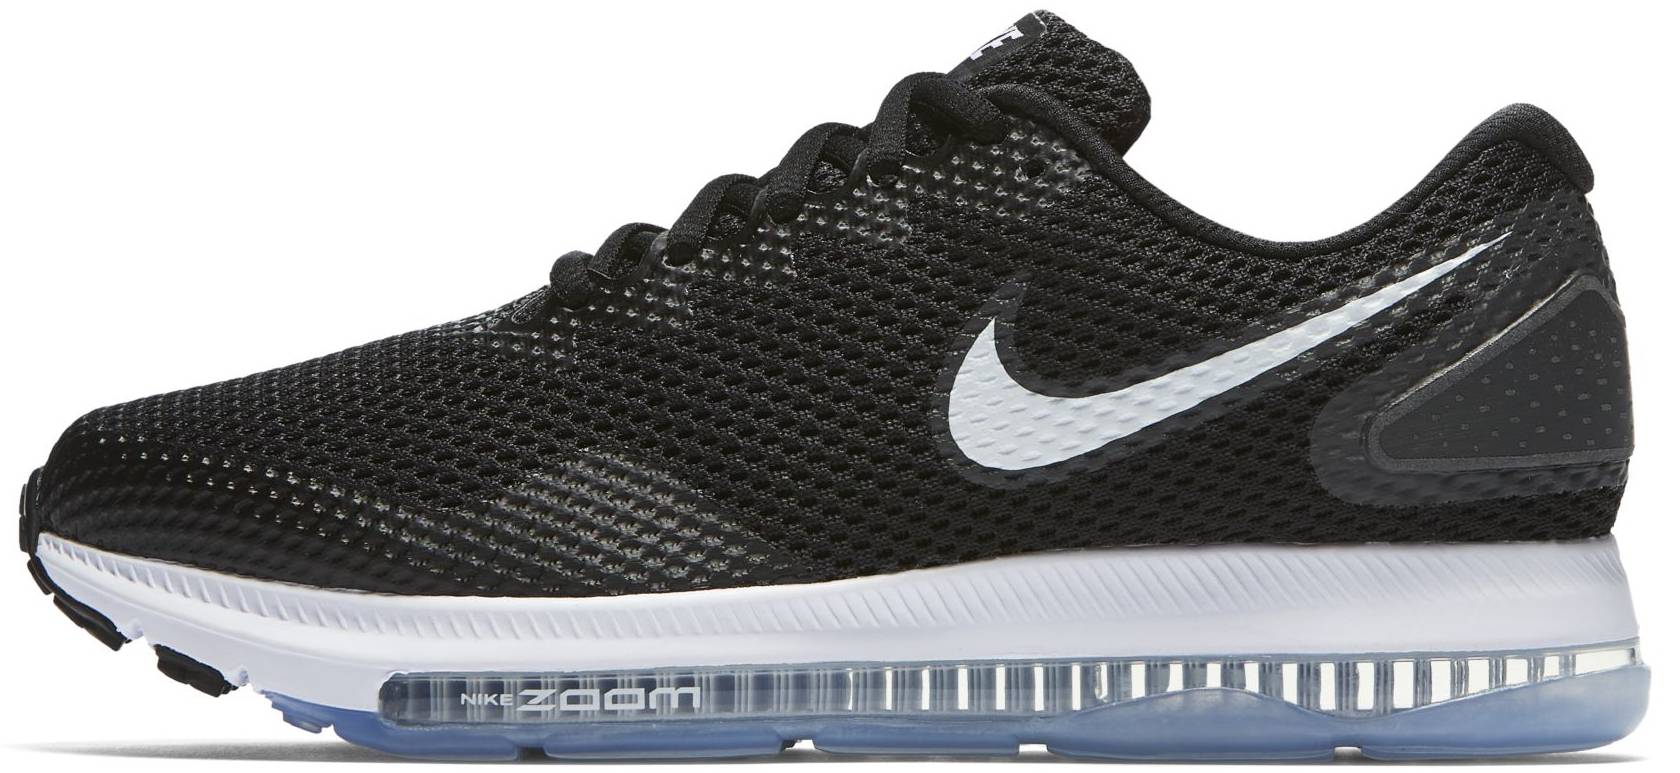 Hola brandy Óptima Nike Zoom All Out Low 2 Review 2023, Facts, Deals ($120) | RunRepeat